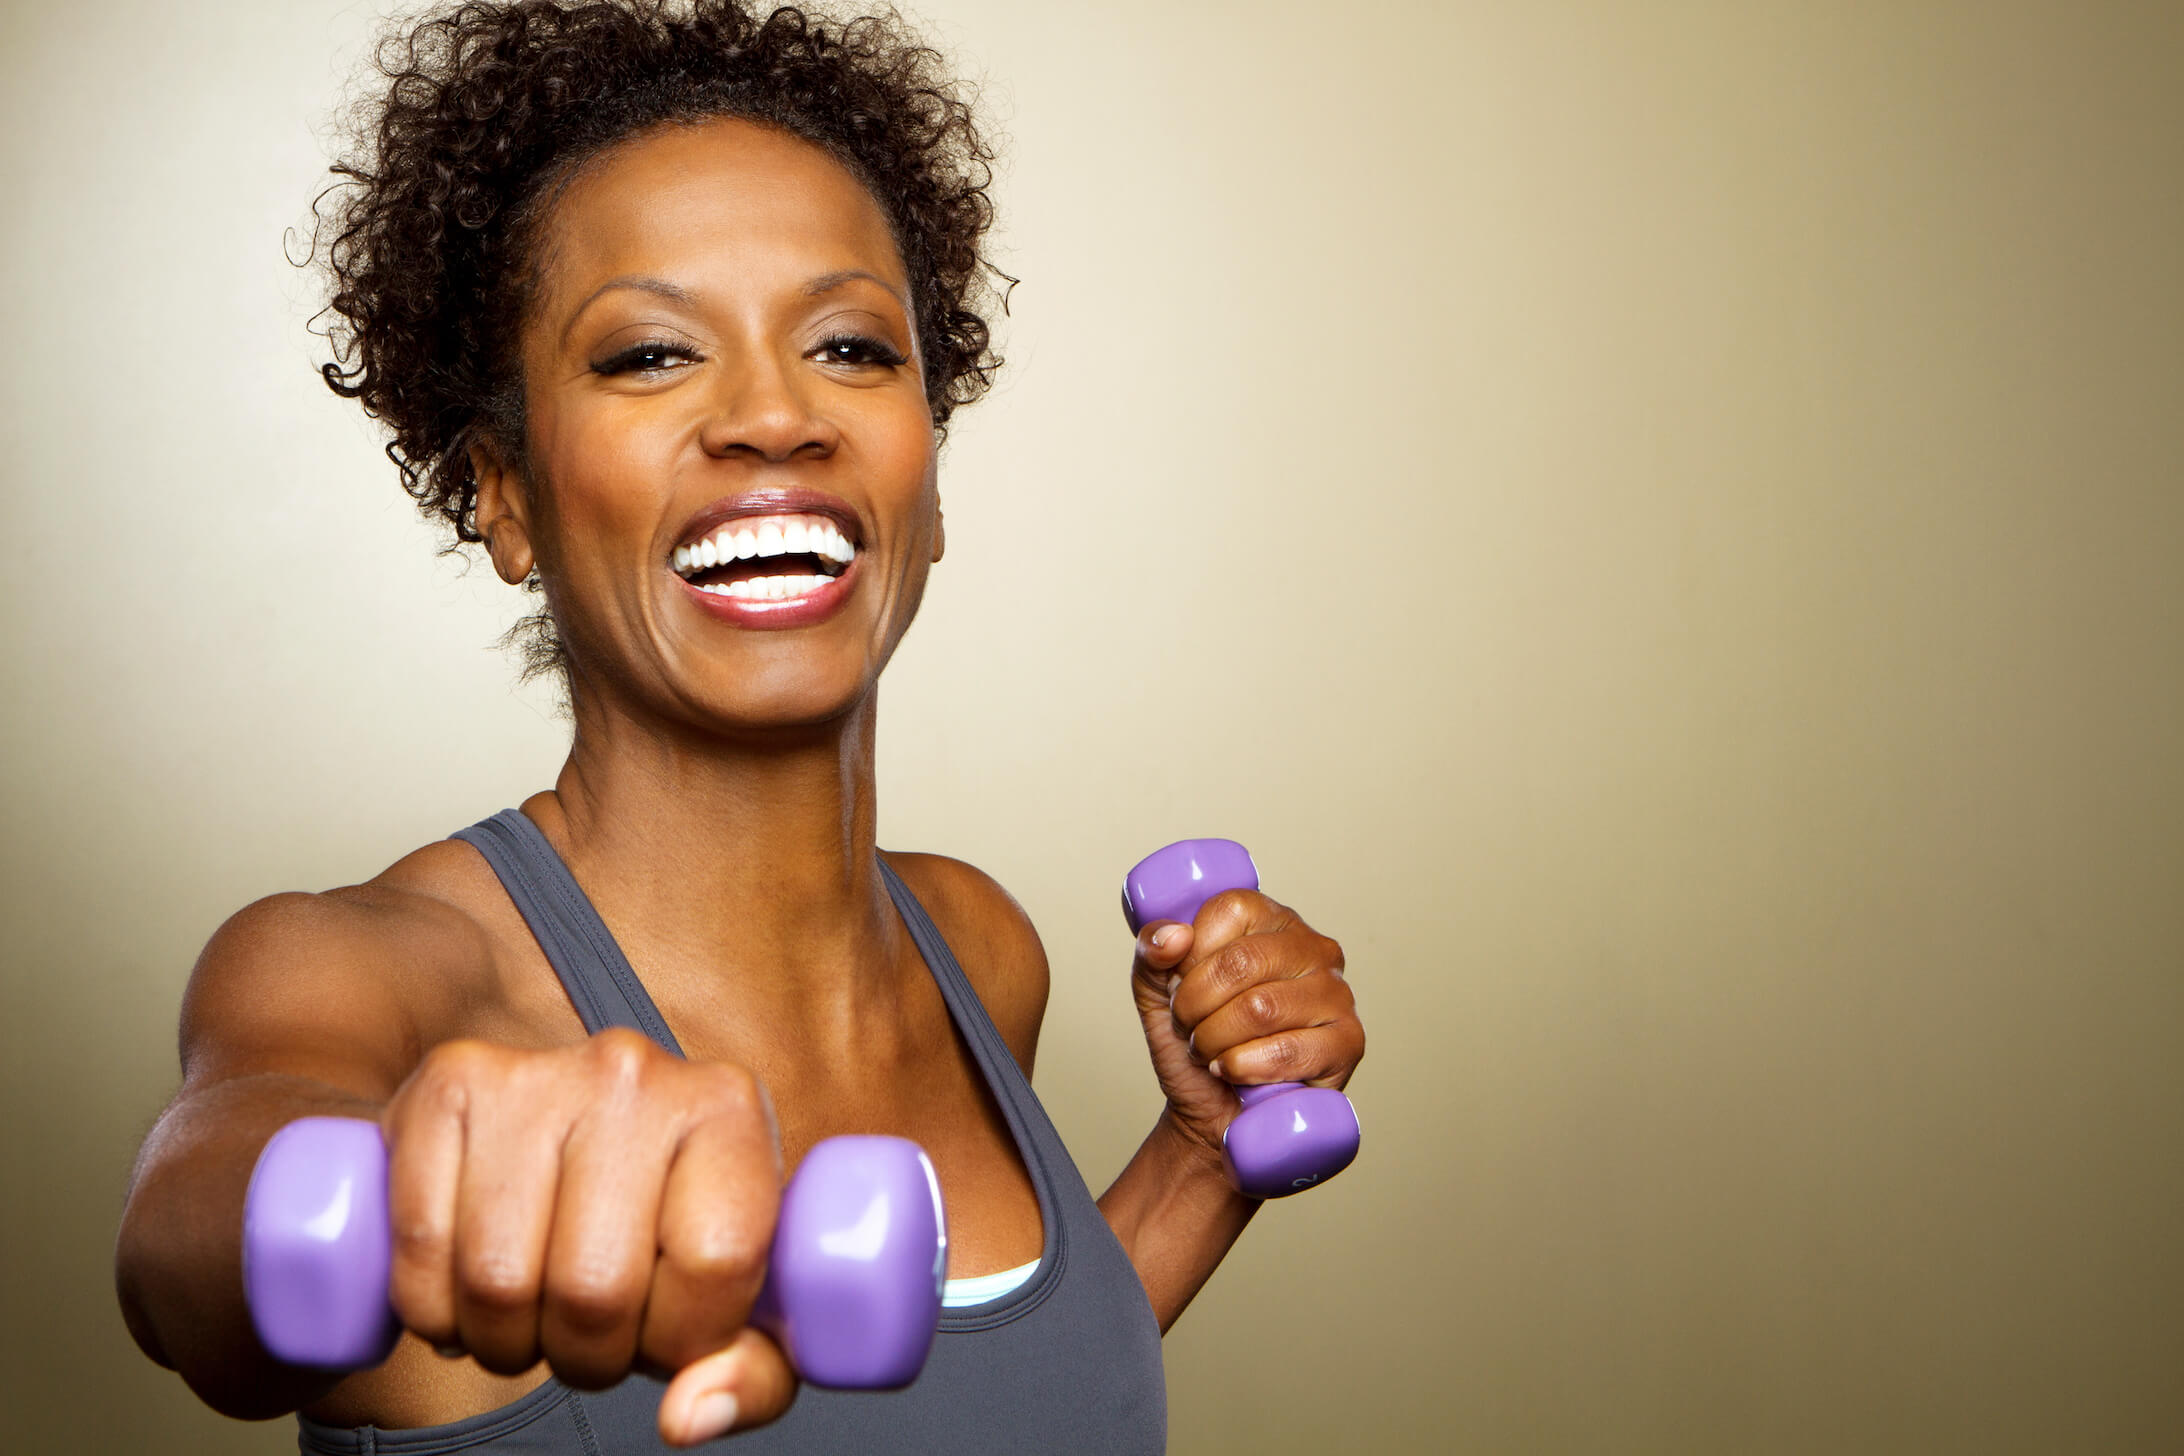 Exercise can help black women and fibroids